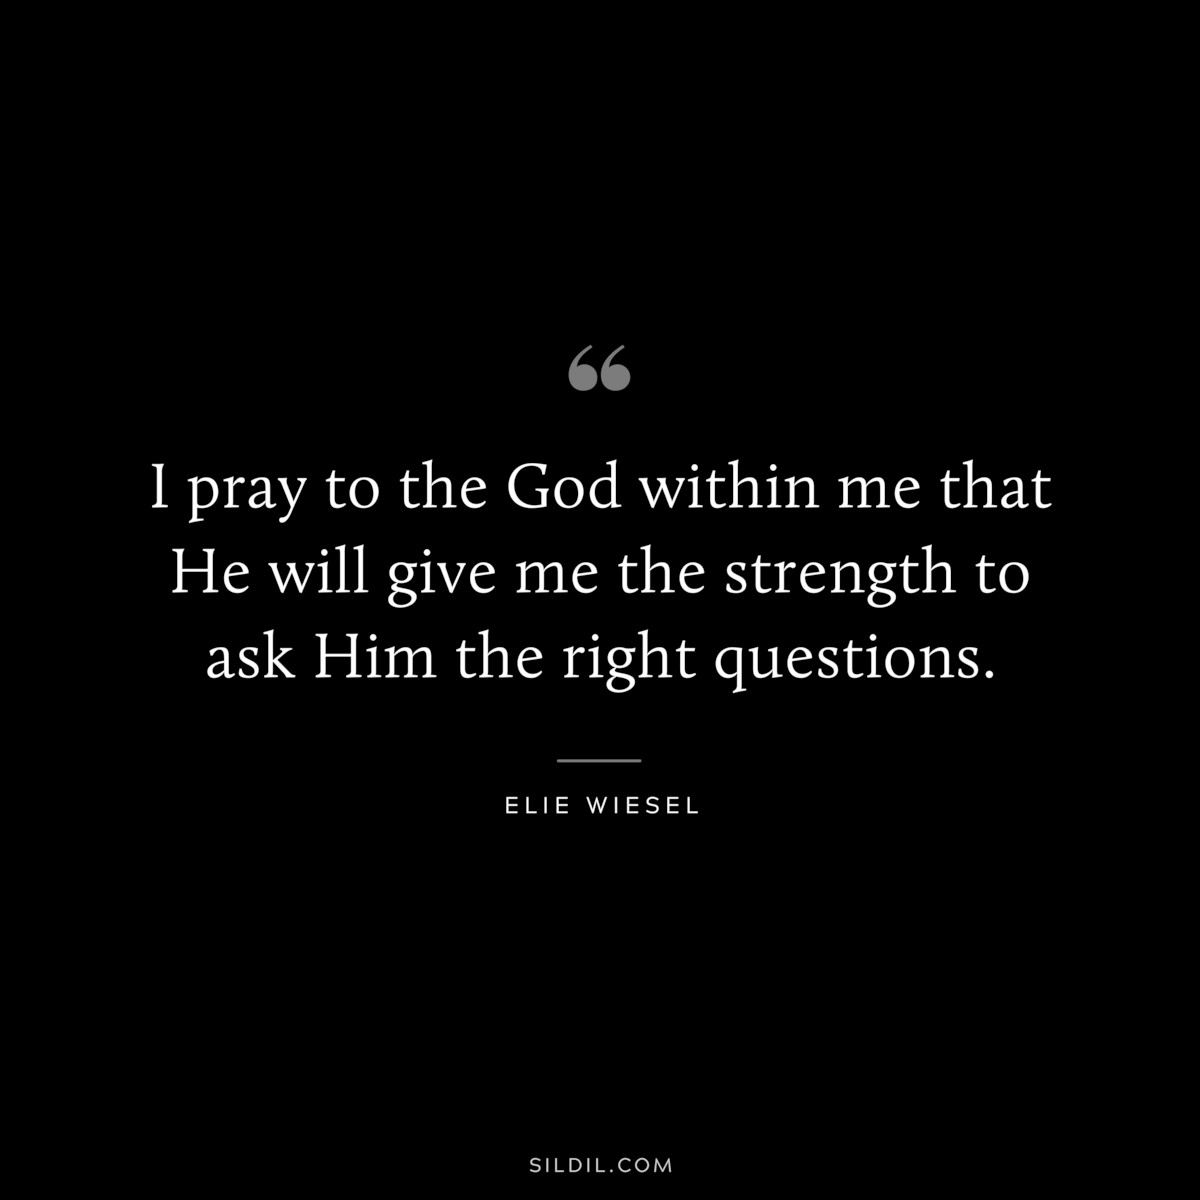 I pray to the God within me that He will give me the strength to ask Him the right questions. ― Elie Wiesel